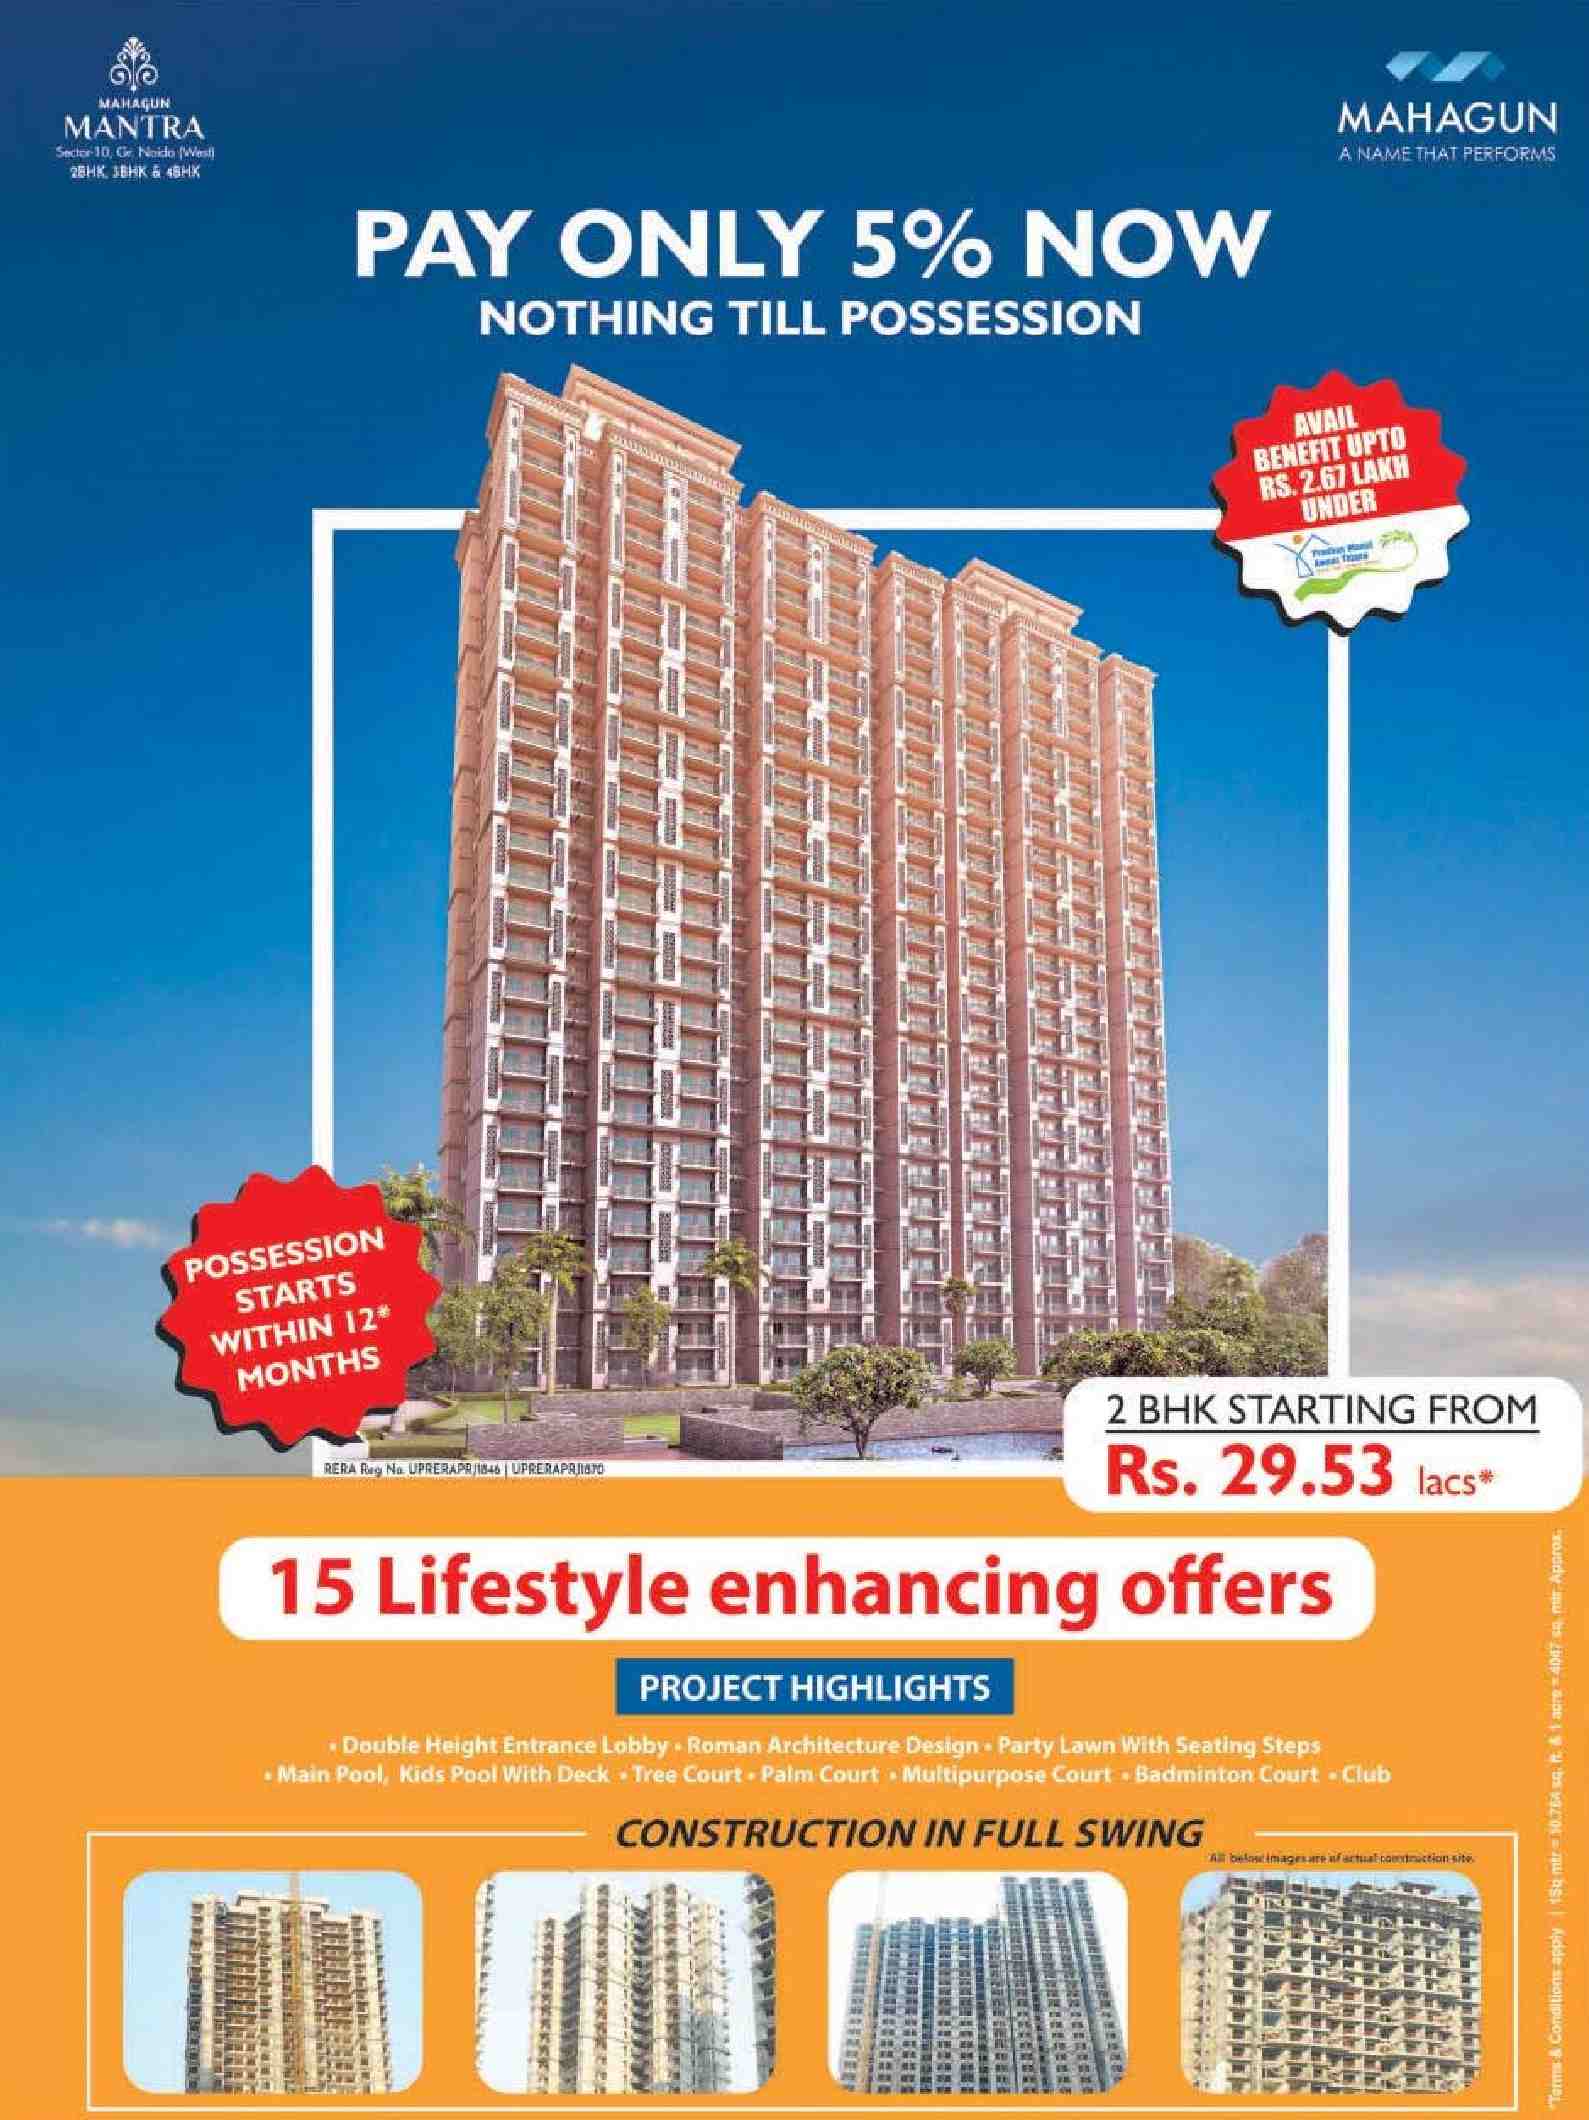 Pay only 5% now & nothing till possession at Mahagun Mantra in Sector 10, Greater Noida Update